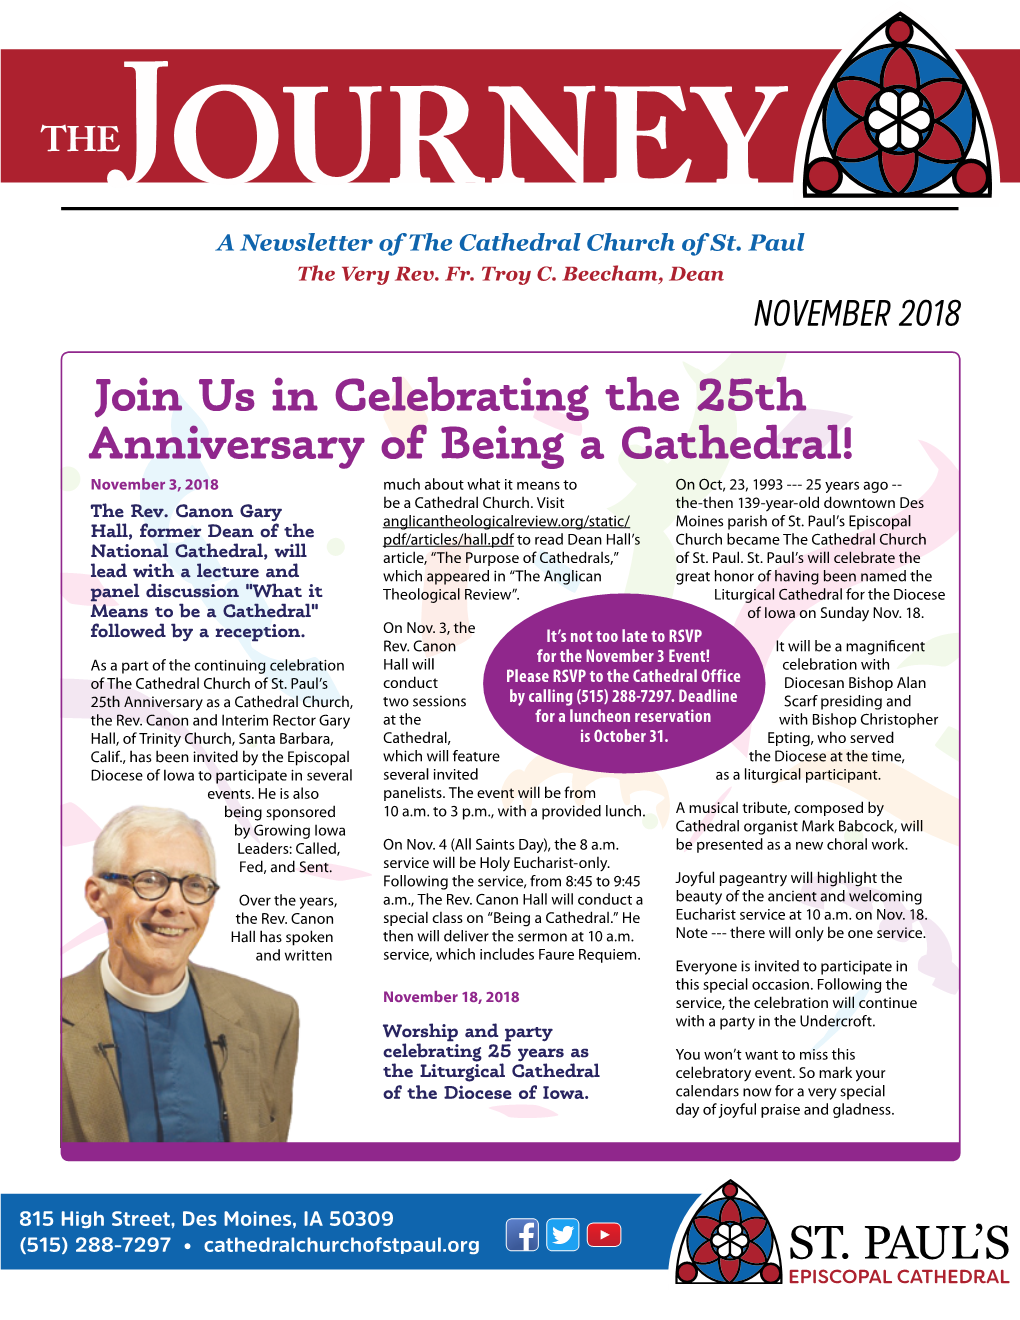 Join Us in Celebrating the 25Th Anniversary of Being a Cathedral! November 3, 2018 Much About What It Means to on Oct, 23, 1993 --- 25 Years Ago -- the Rev